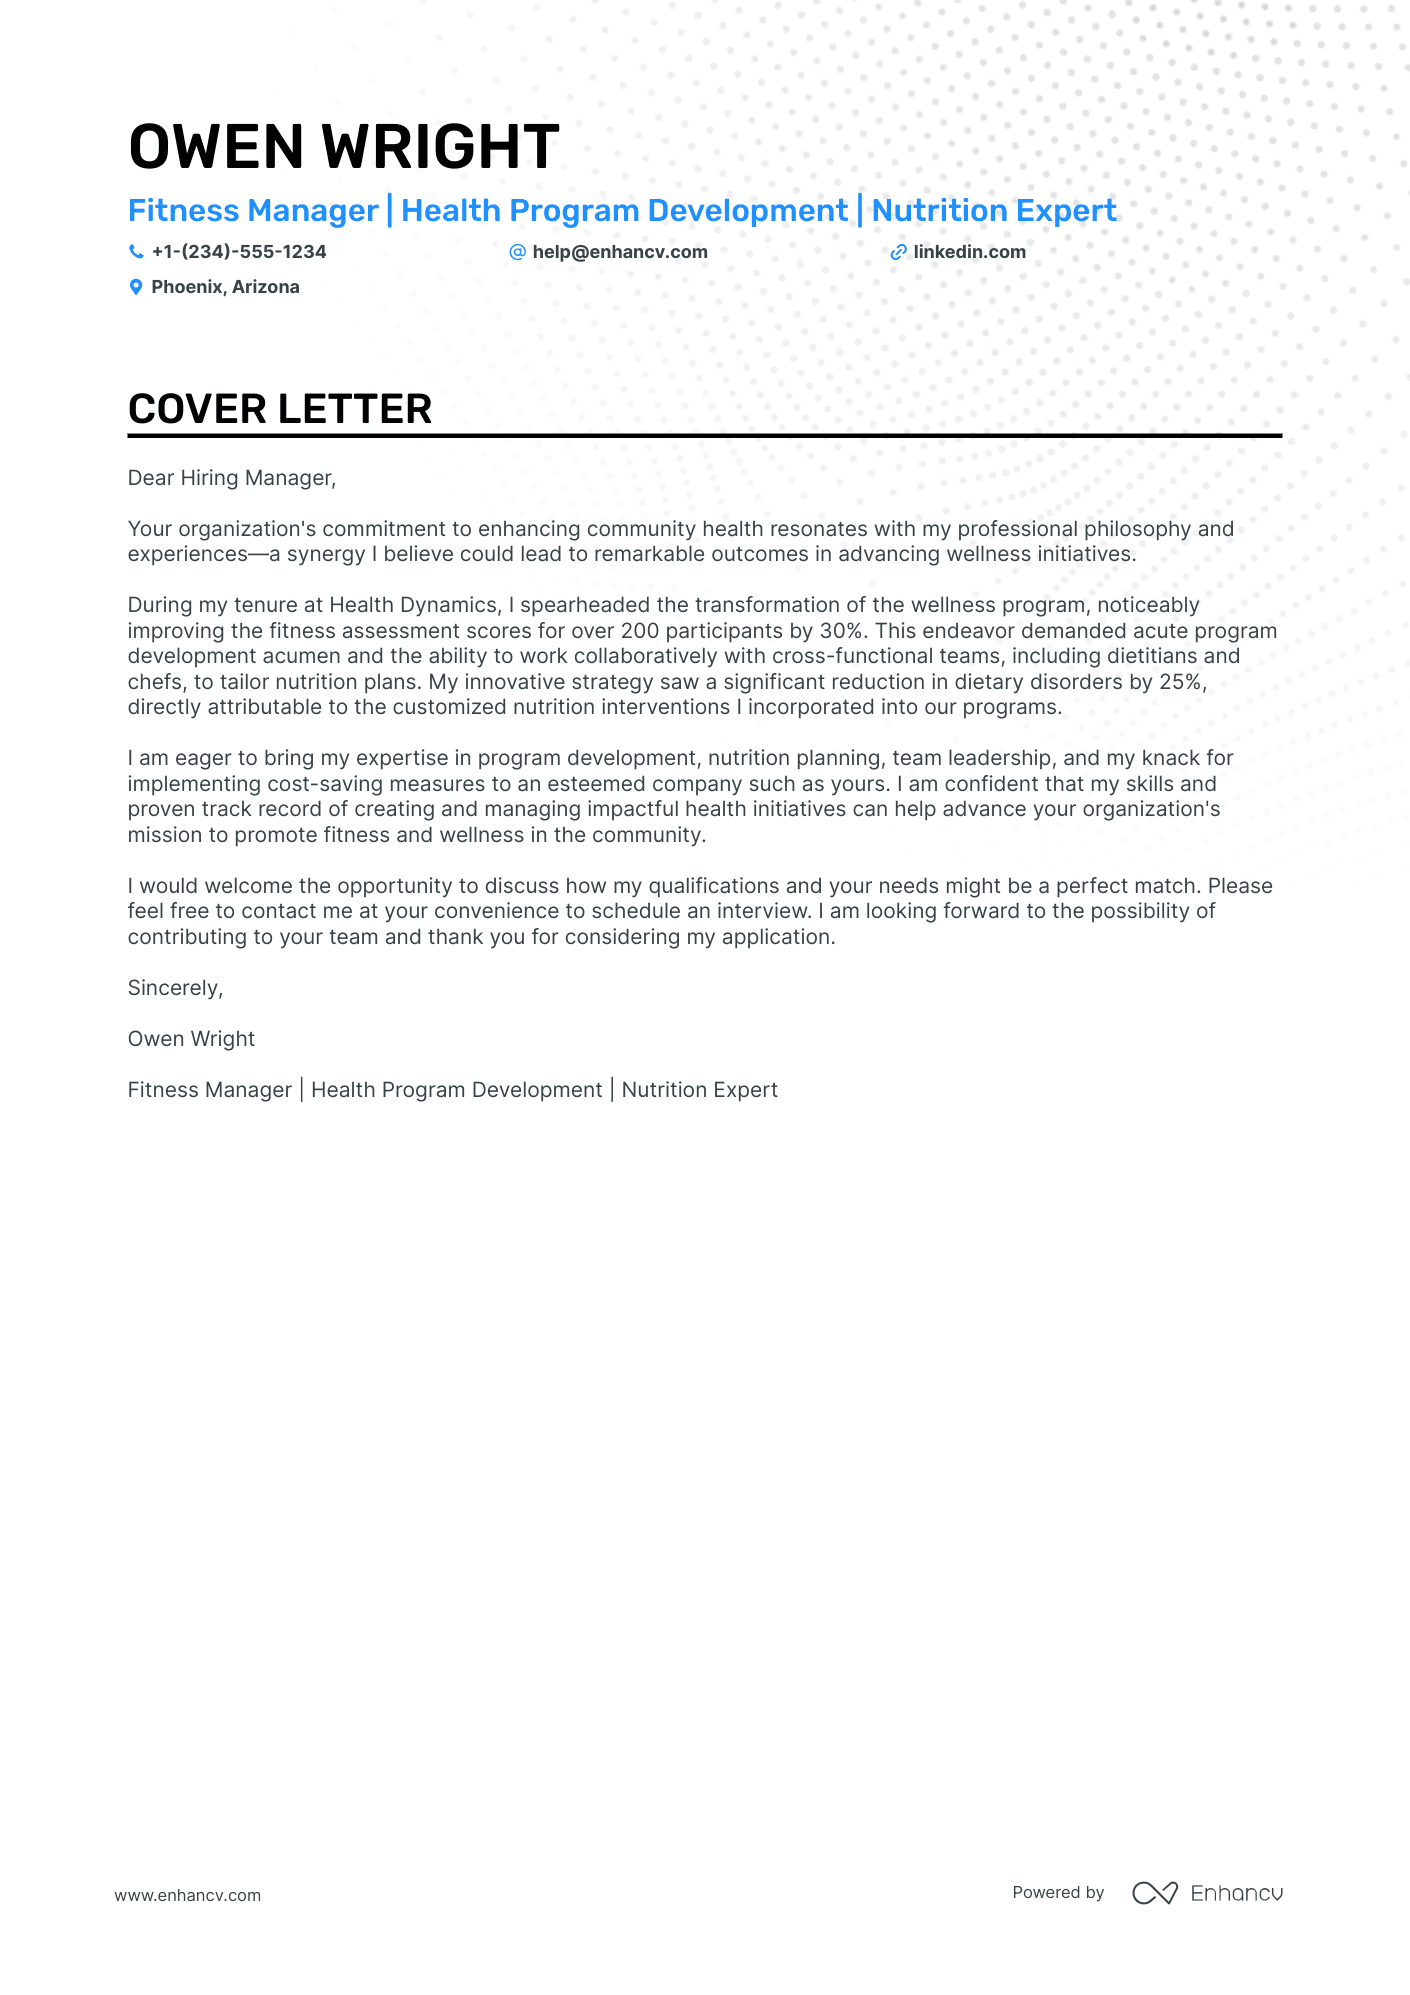 Fitness Manager cover letter